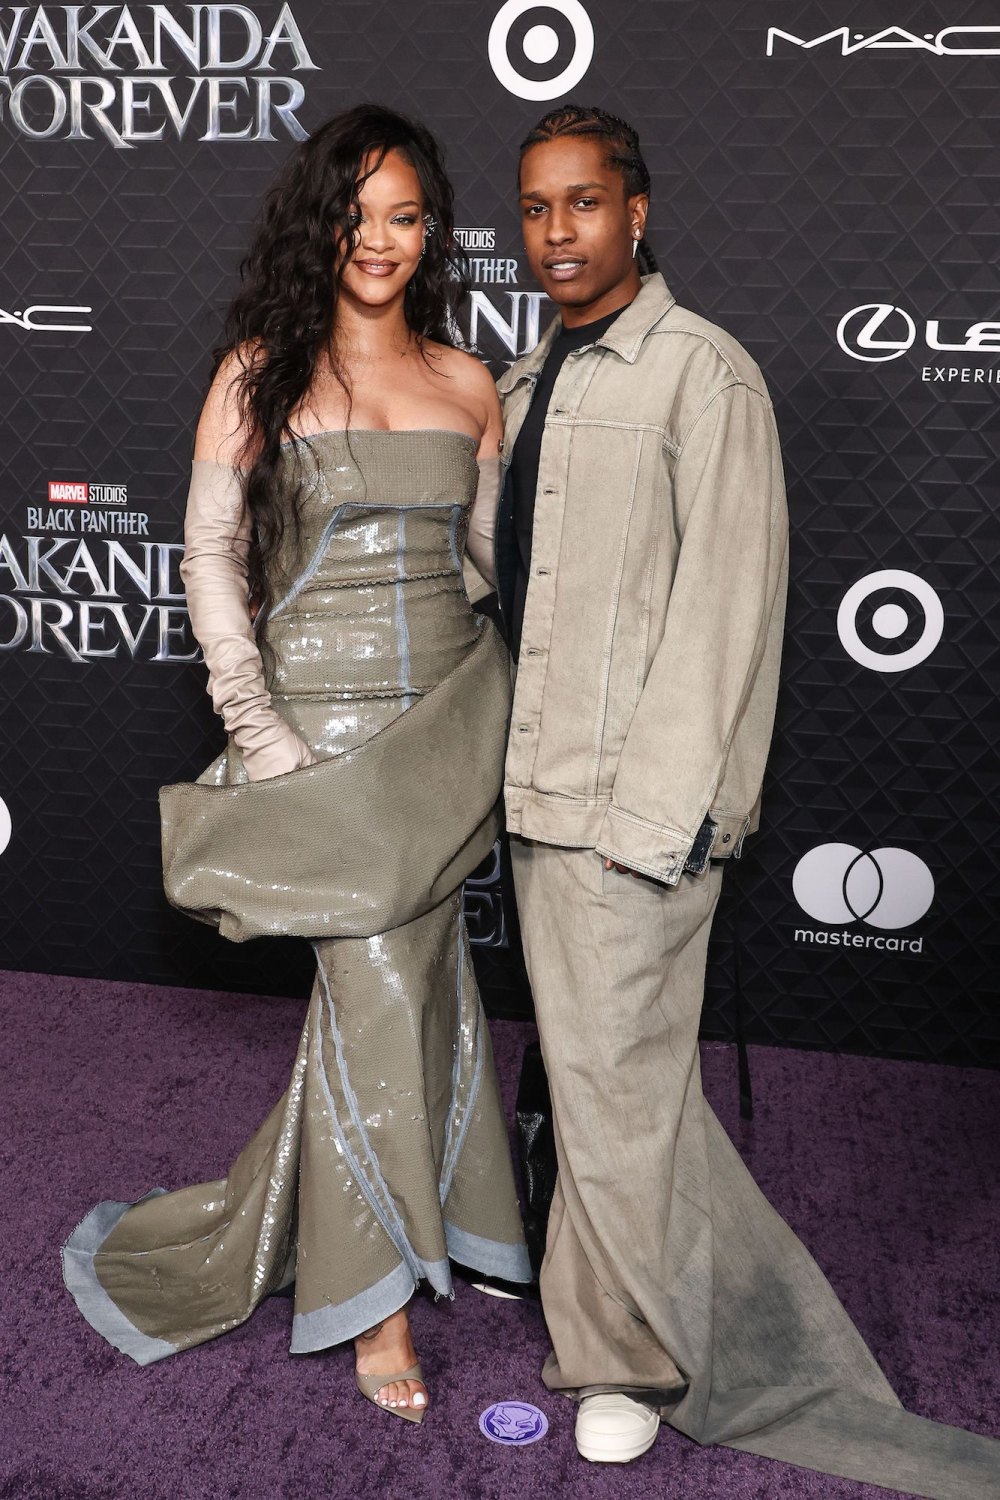 Rihanna and ASAP Rocky Have Talked About Getting Married Down the Line